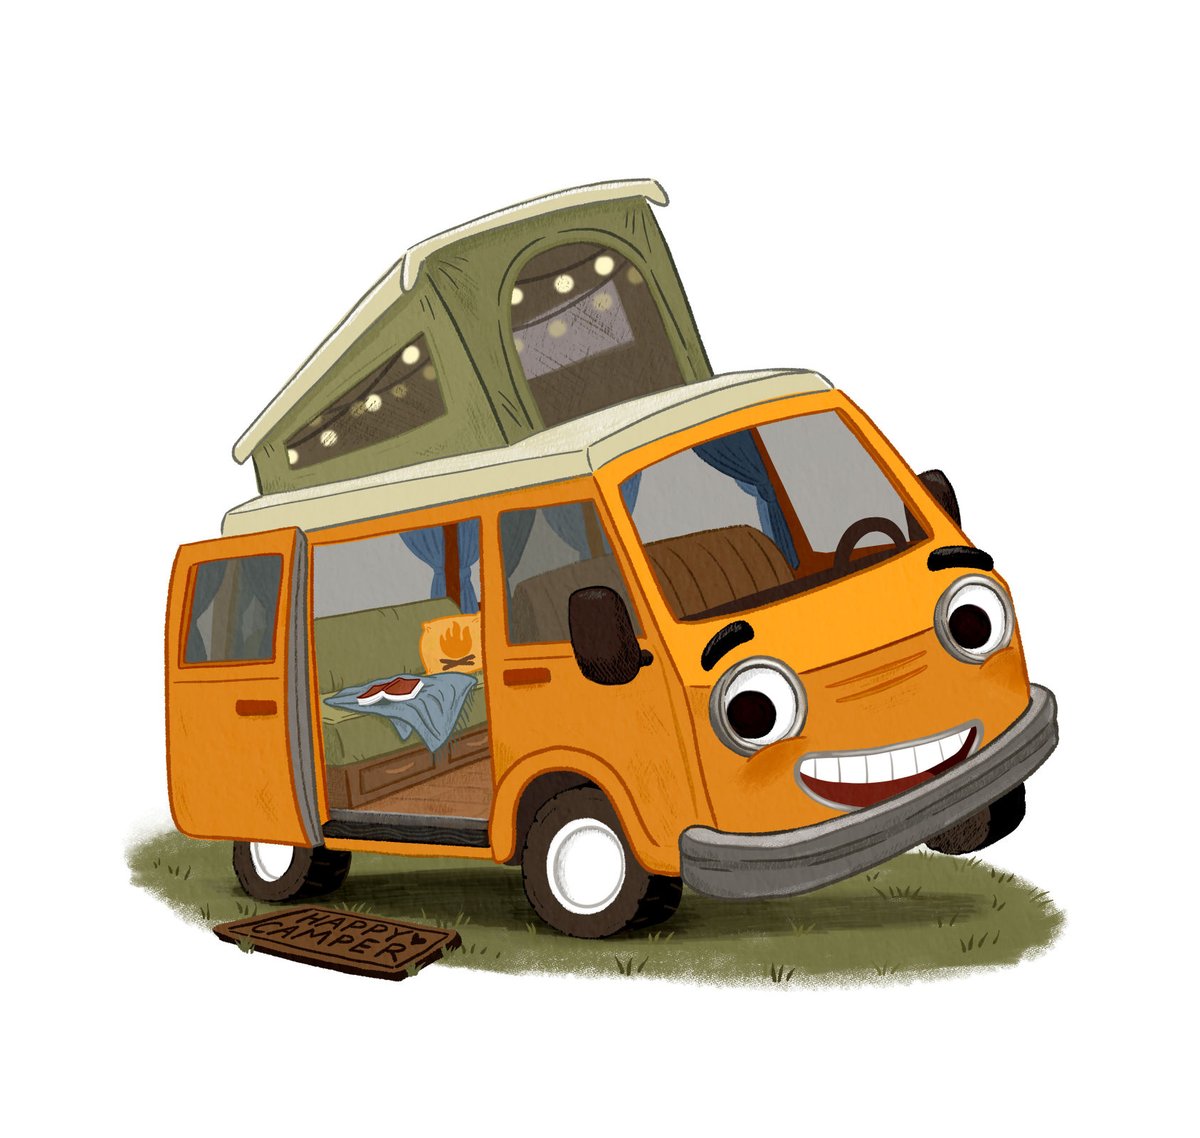 Tried something new! I didn't really have any vehicles in my portfolio so I designed some cute camper characters. This was a lot of fun but man it's making me wanna escape to the desert. 🌵⛺️🌛
#kidlitart #kidlitartist #vehicleillustration #picturebook